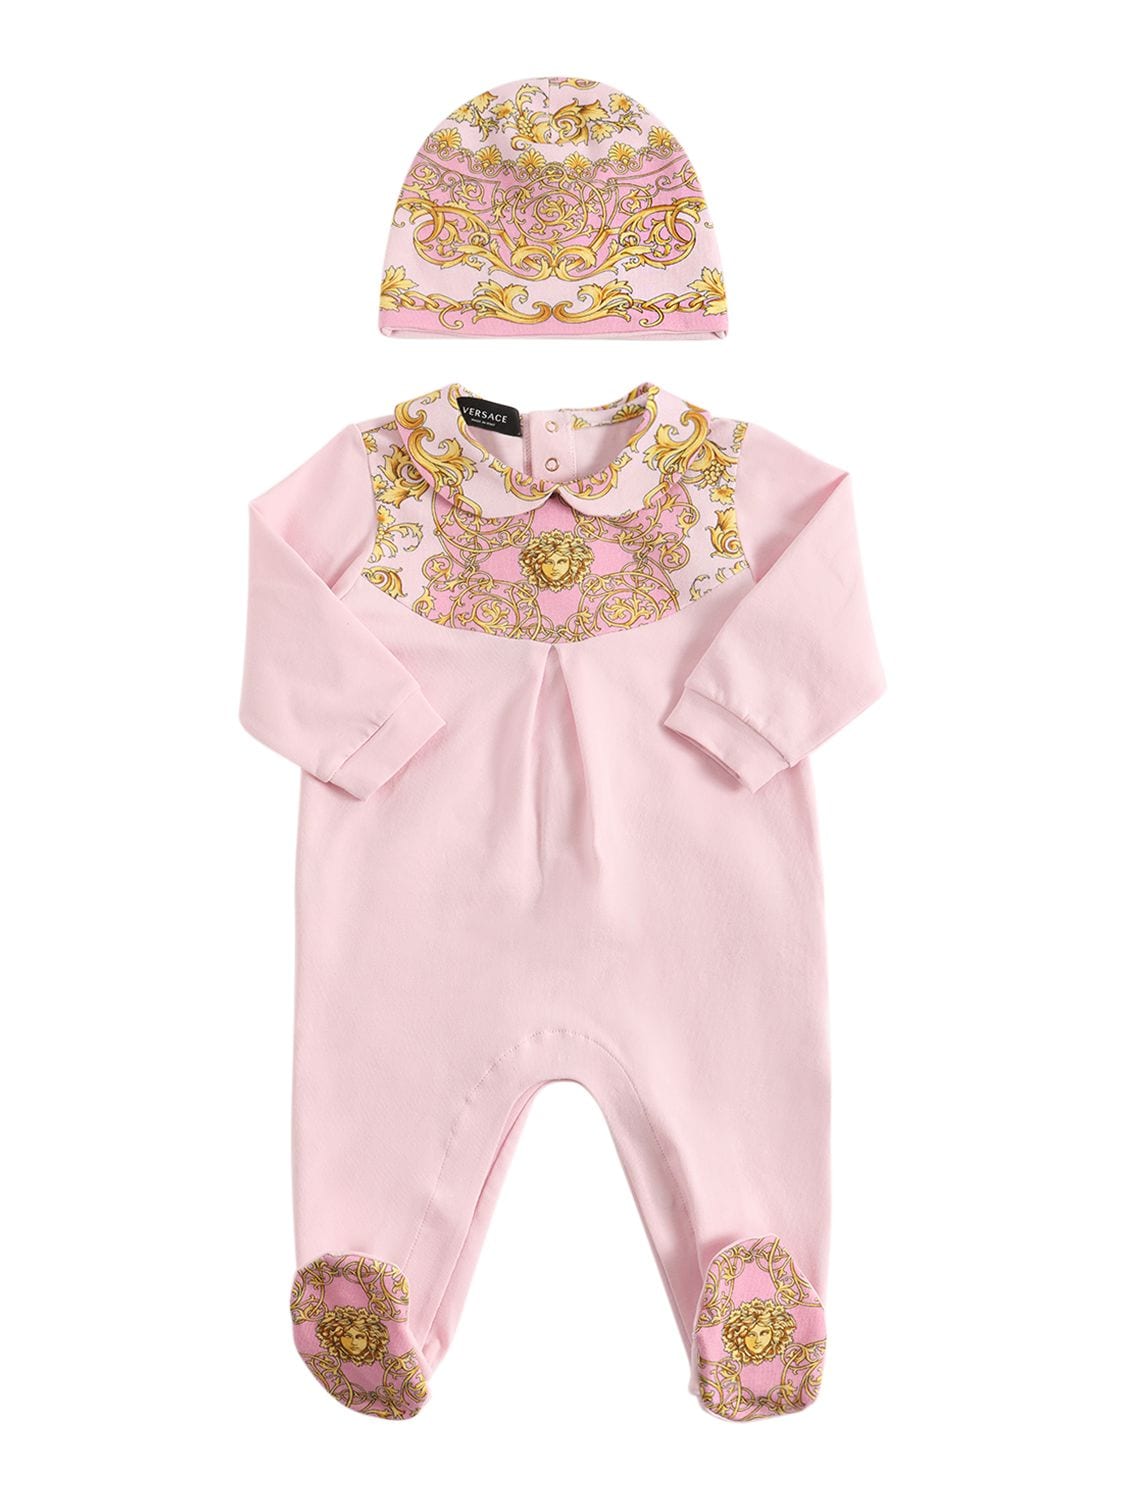 Versace Babies' Printed Cotton Jersey Romper & Hat In Pink,gold